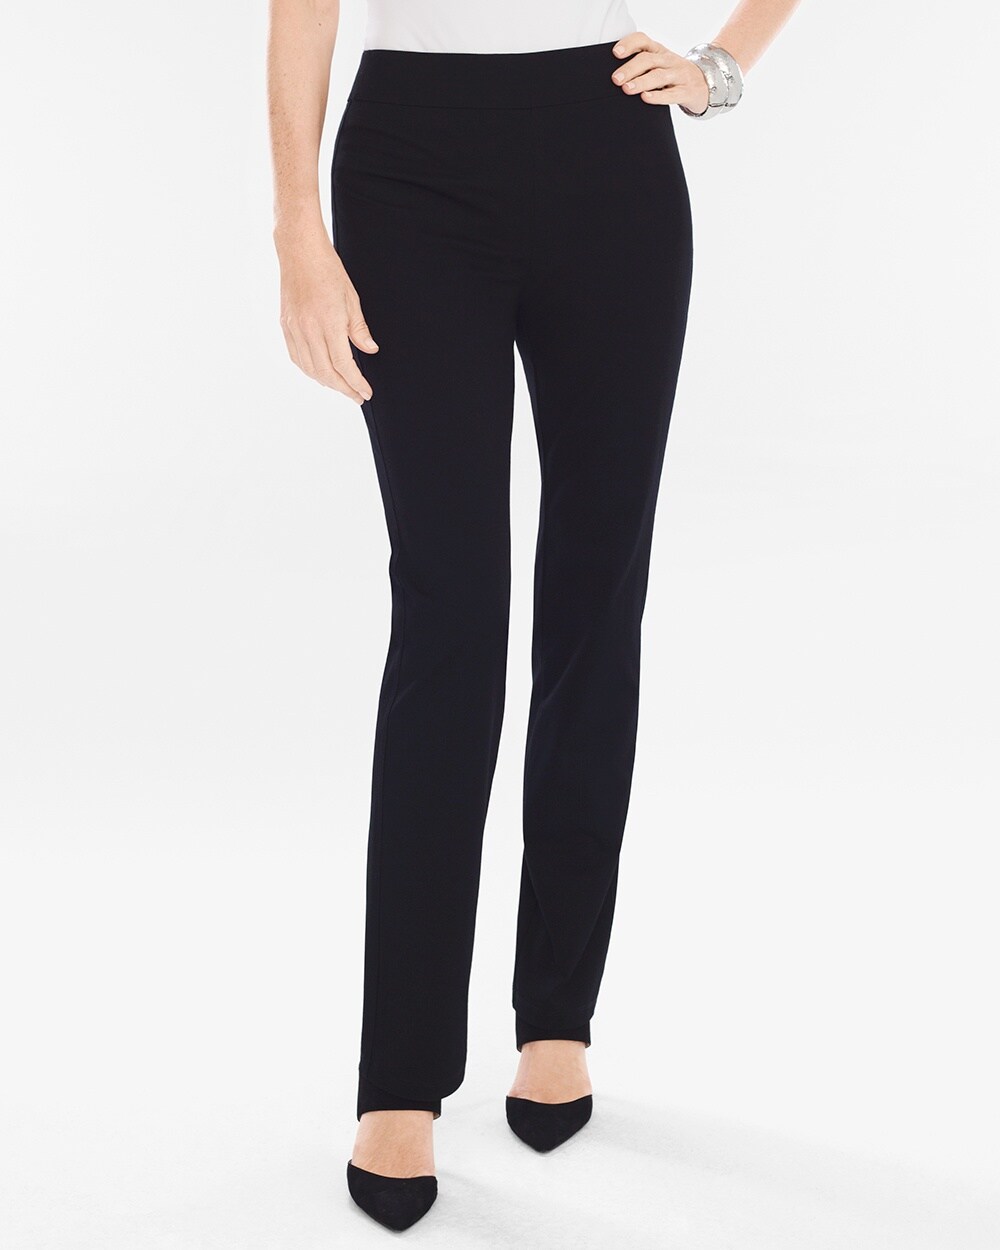 Travelers Collection Full-Length Crepe Pants